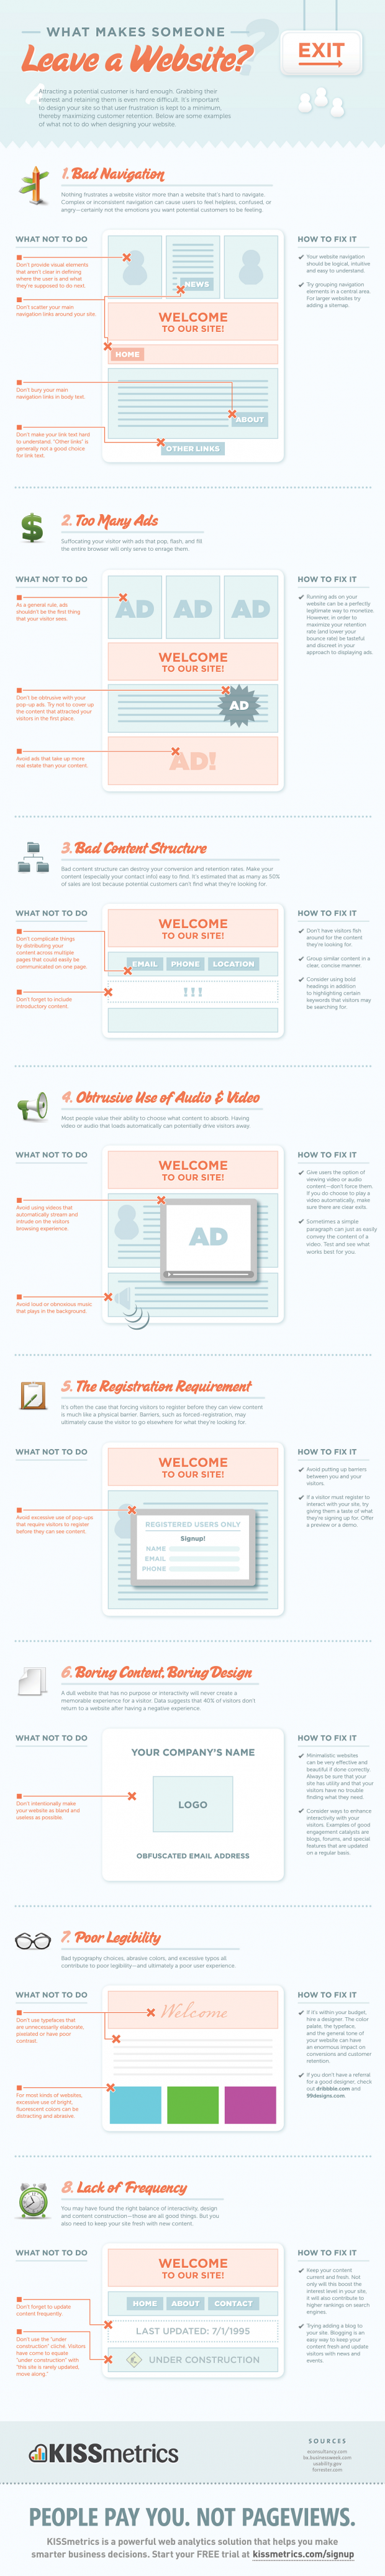 Why Do Visitors Leave Your Website? [Infographic]